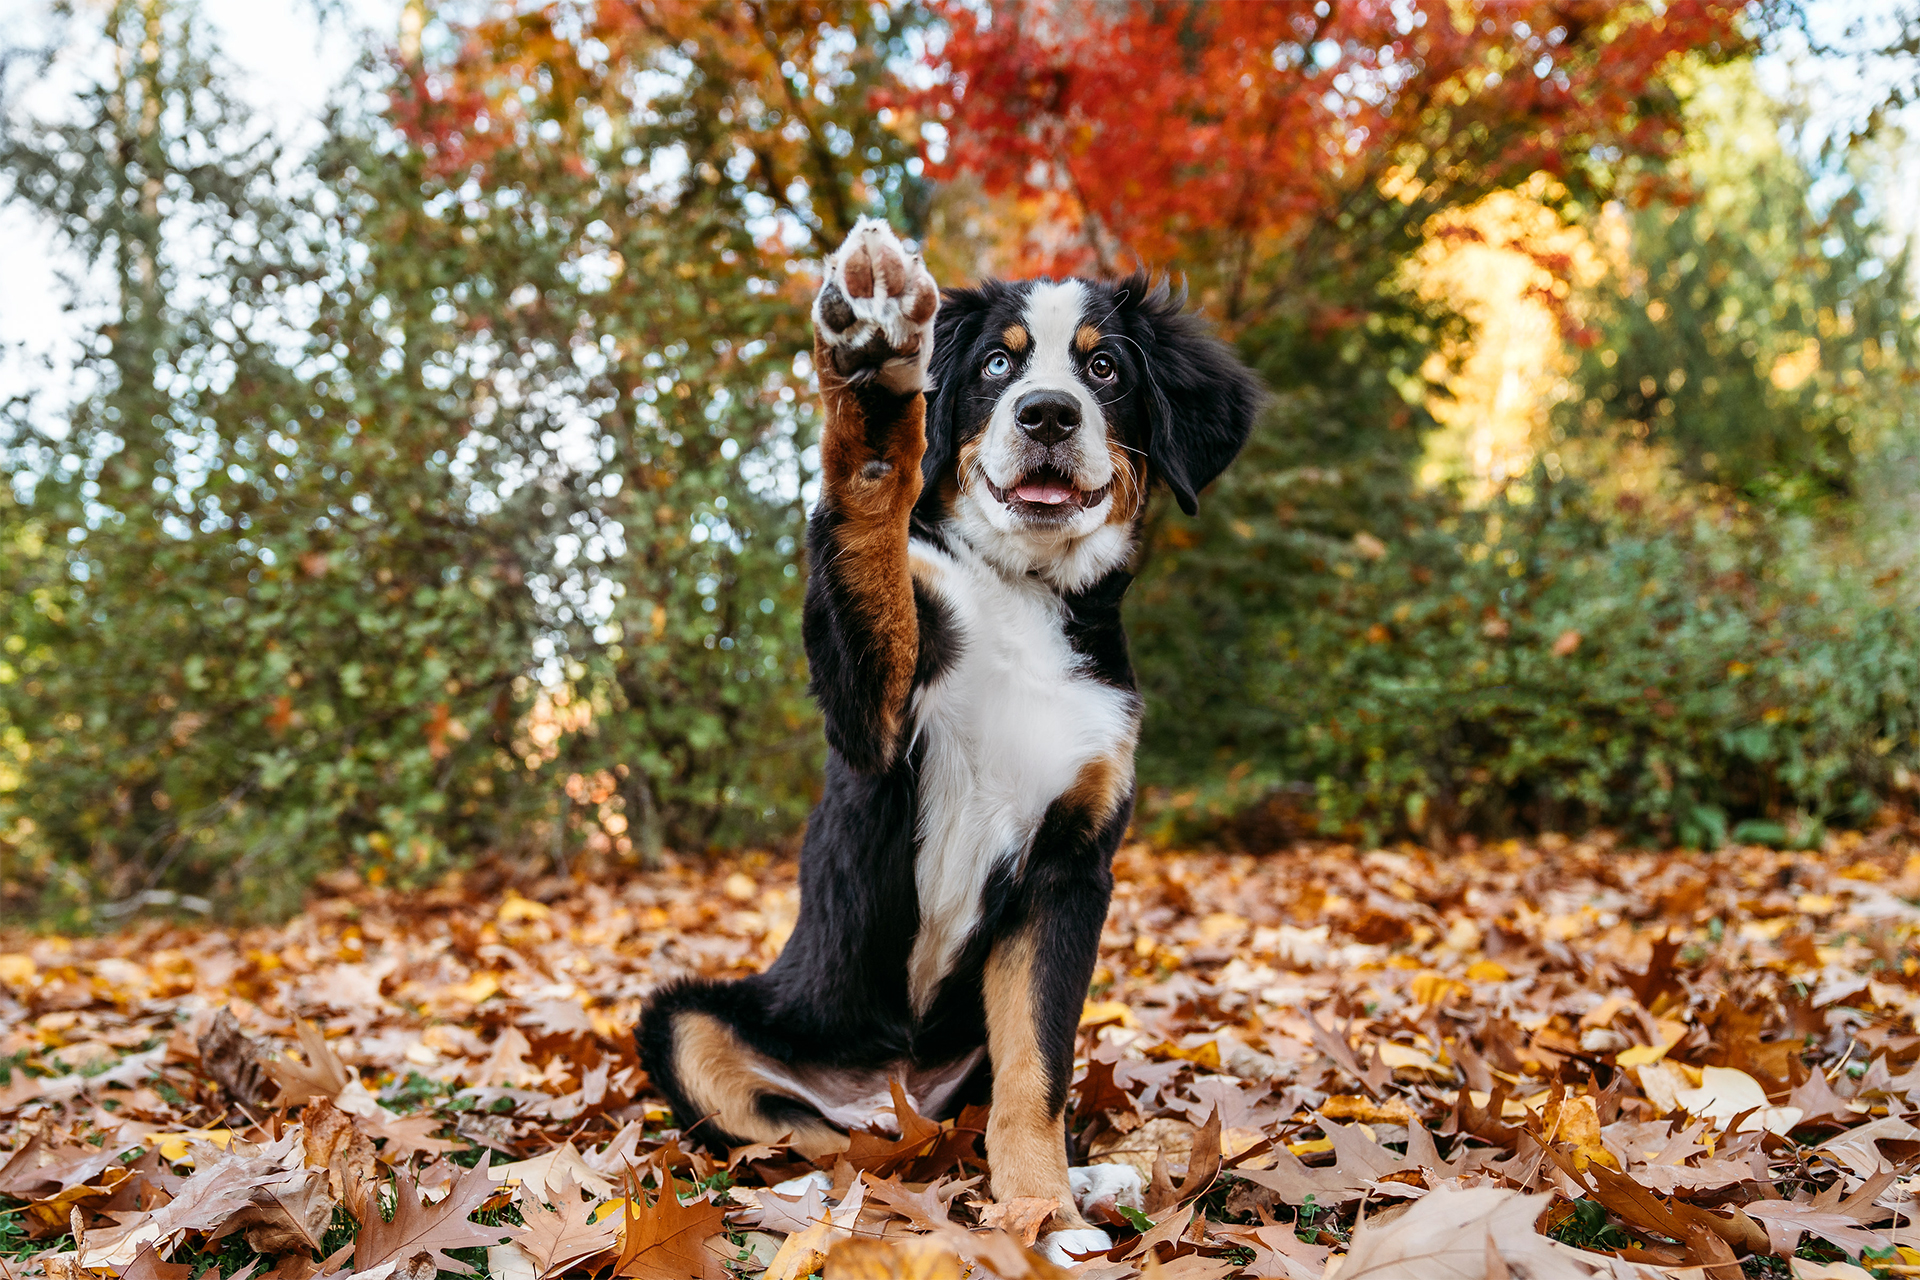 Bernese Mountain Dog puppy with one blue eye and one brown eye raises his paw in the air while sitting in autumn leaves in SE Portland